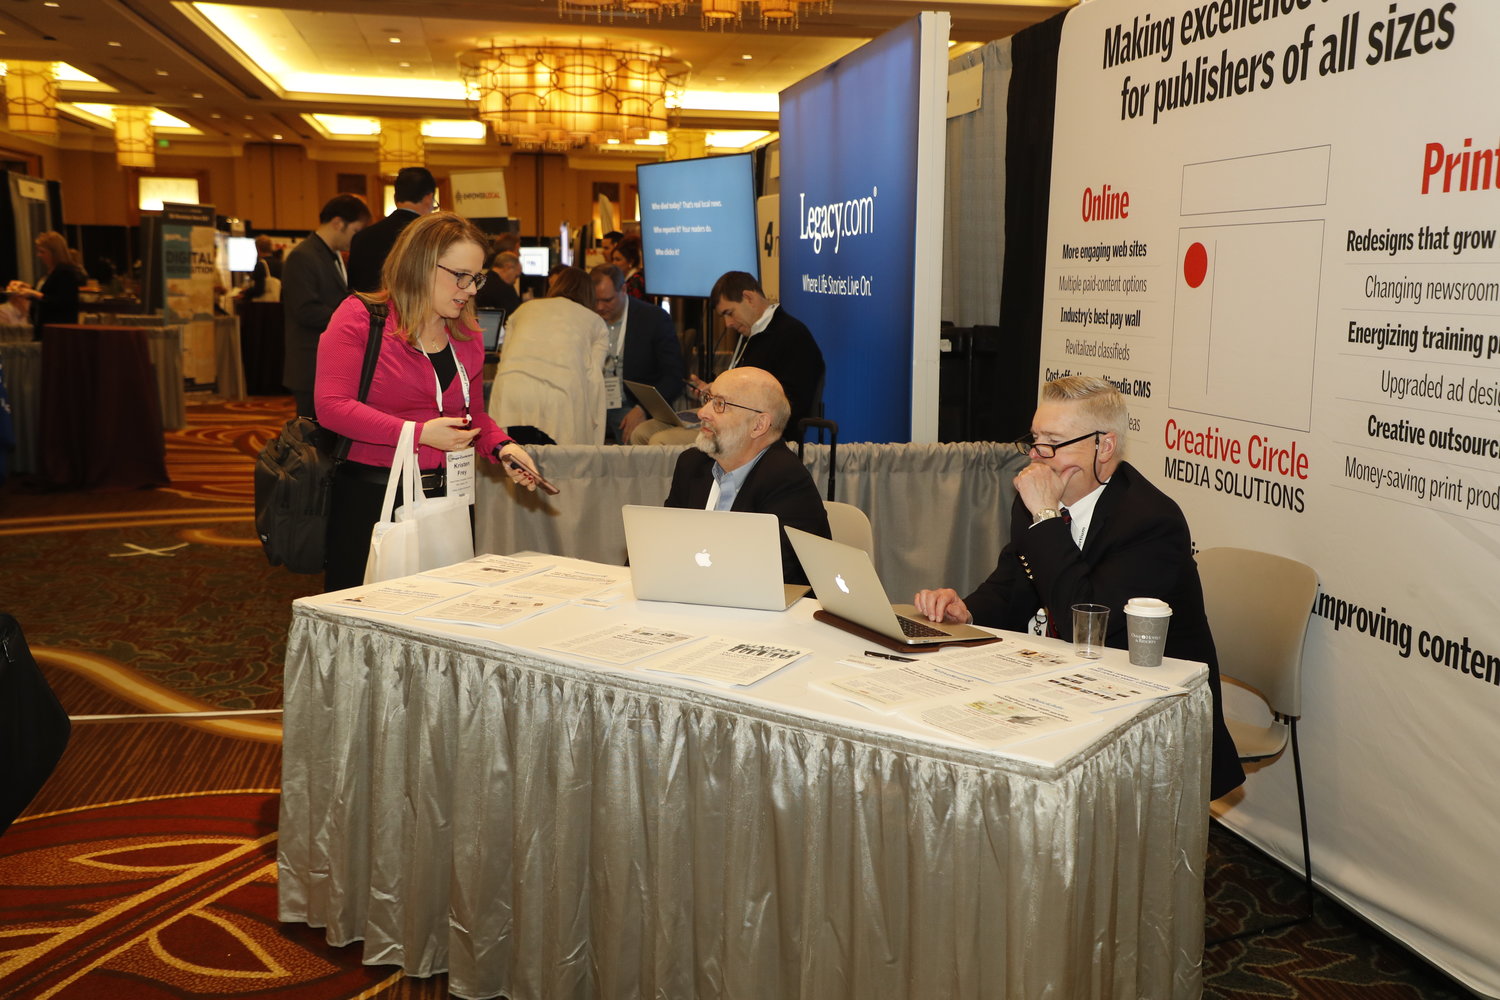 Monday photos of the 2020 Mega-Conference at the Omni Hotel in Fort Worth, Texas, Feb. 17, 2020. (Photo by Bob Booth)